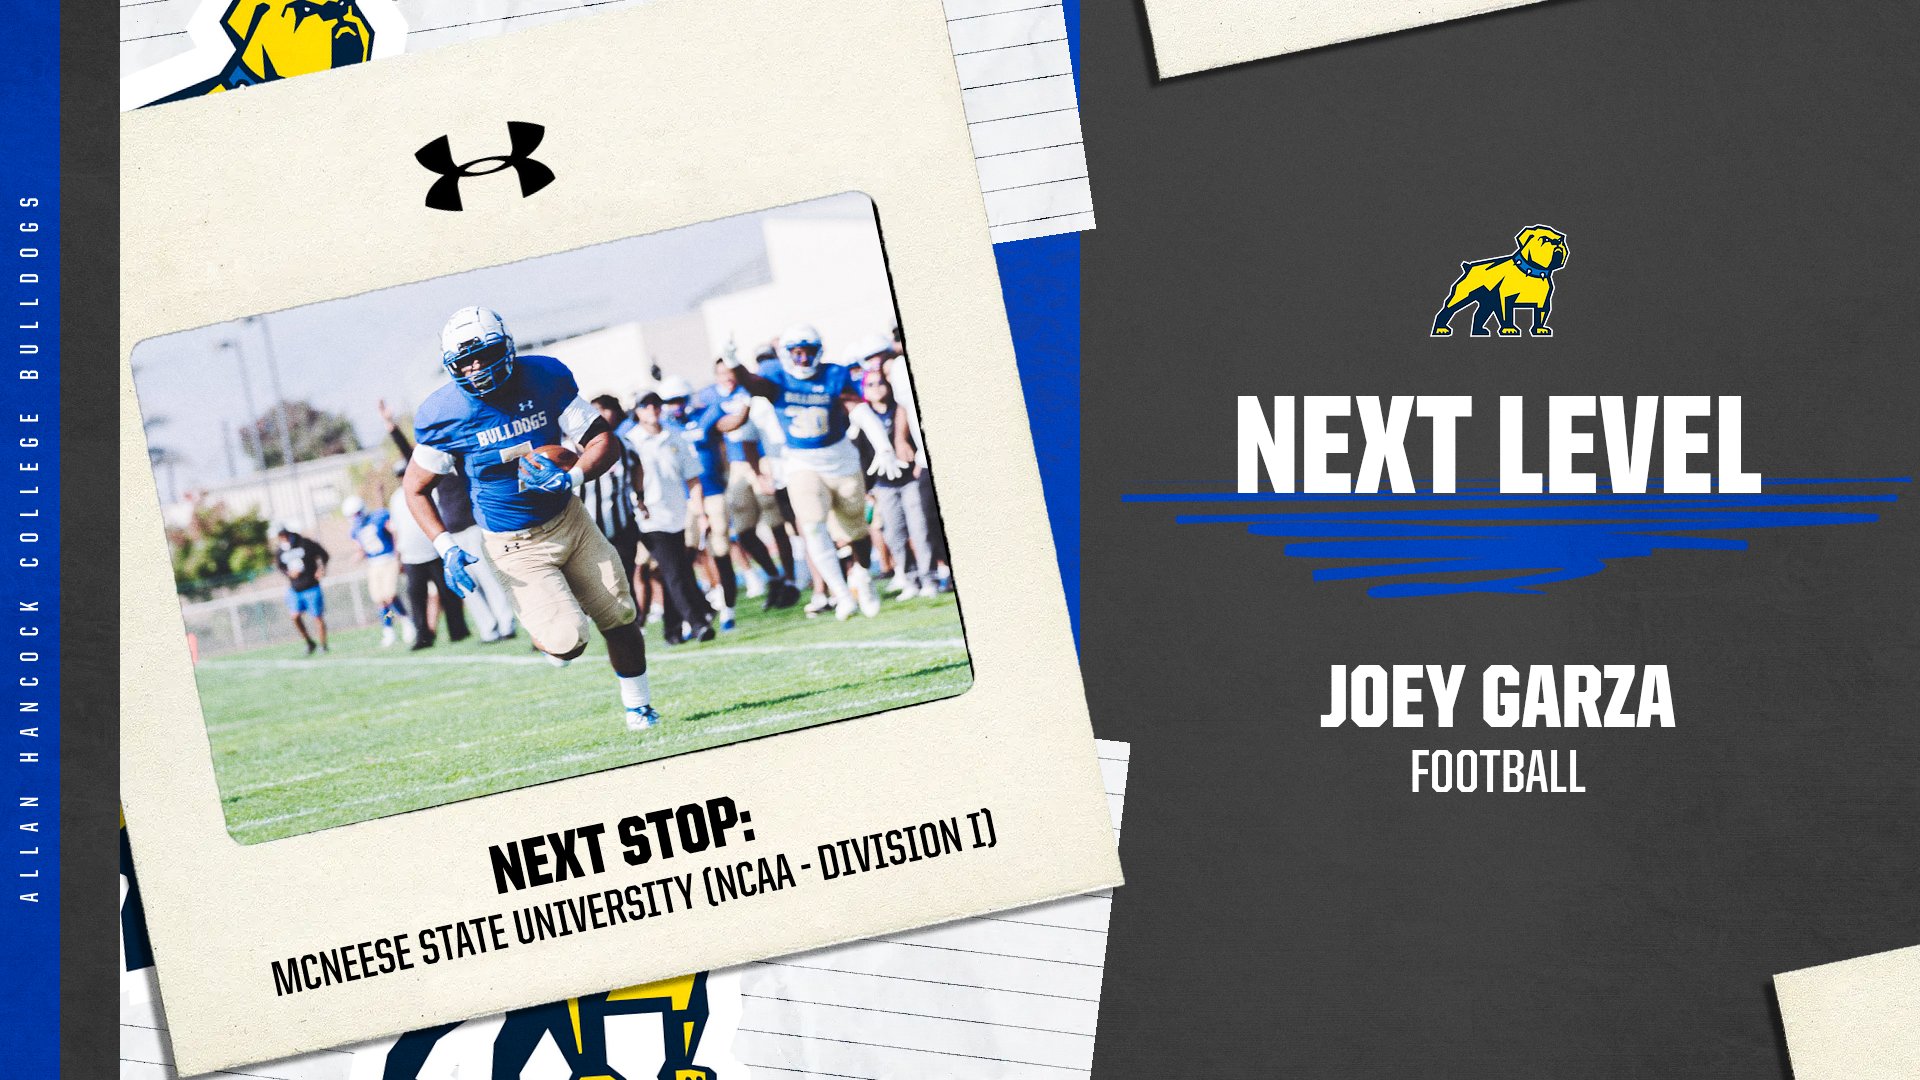 Next Level: Joey Garza to Join McNeese State Roster